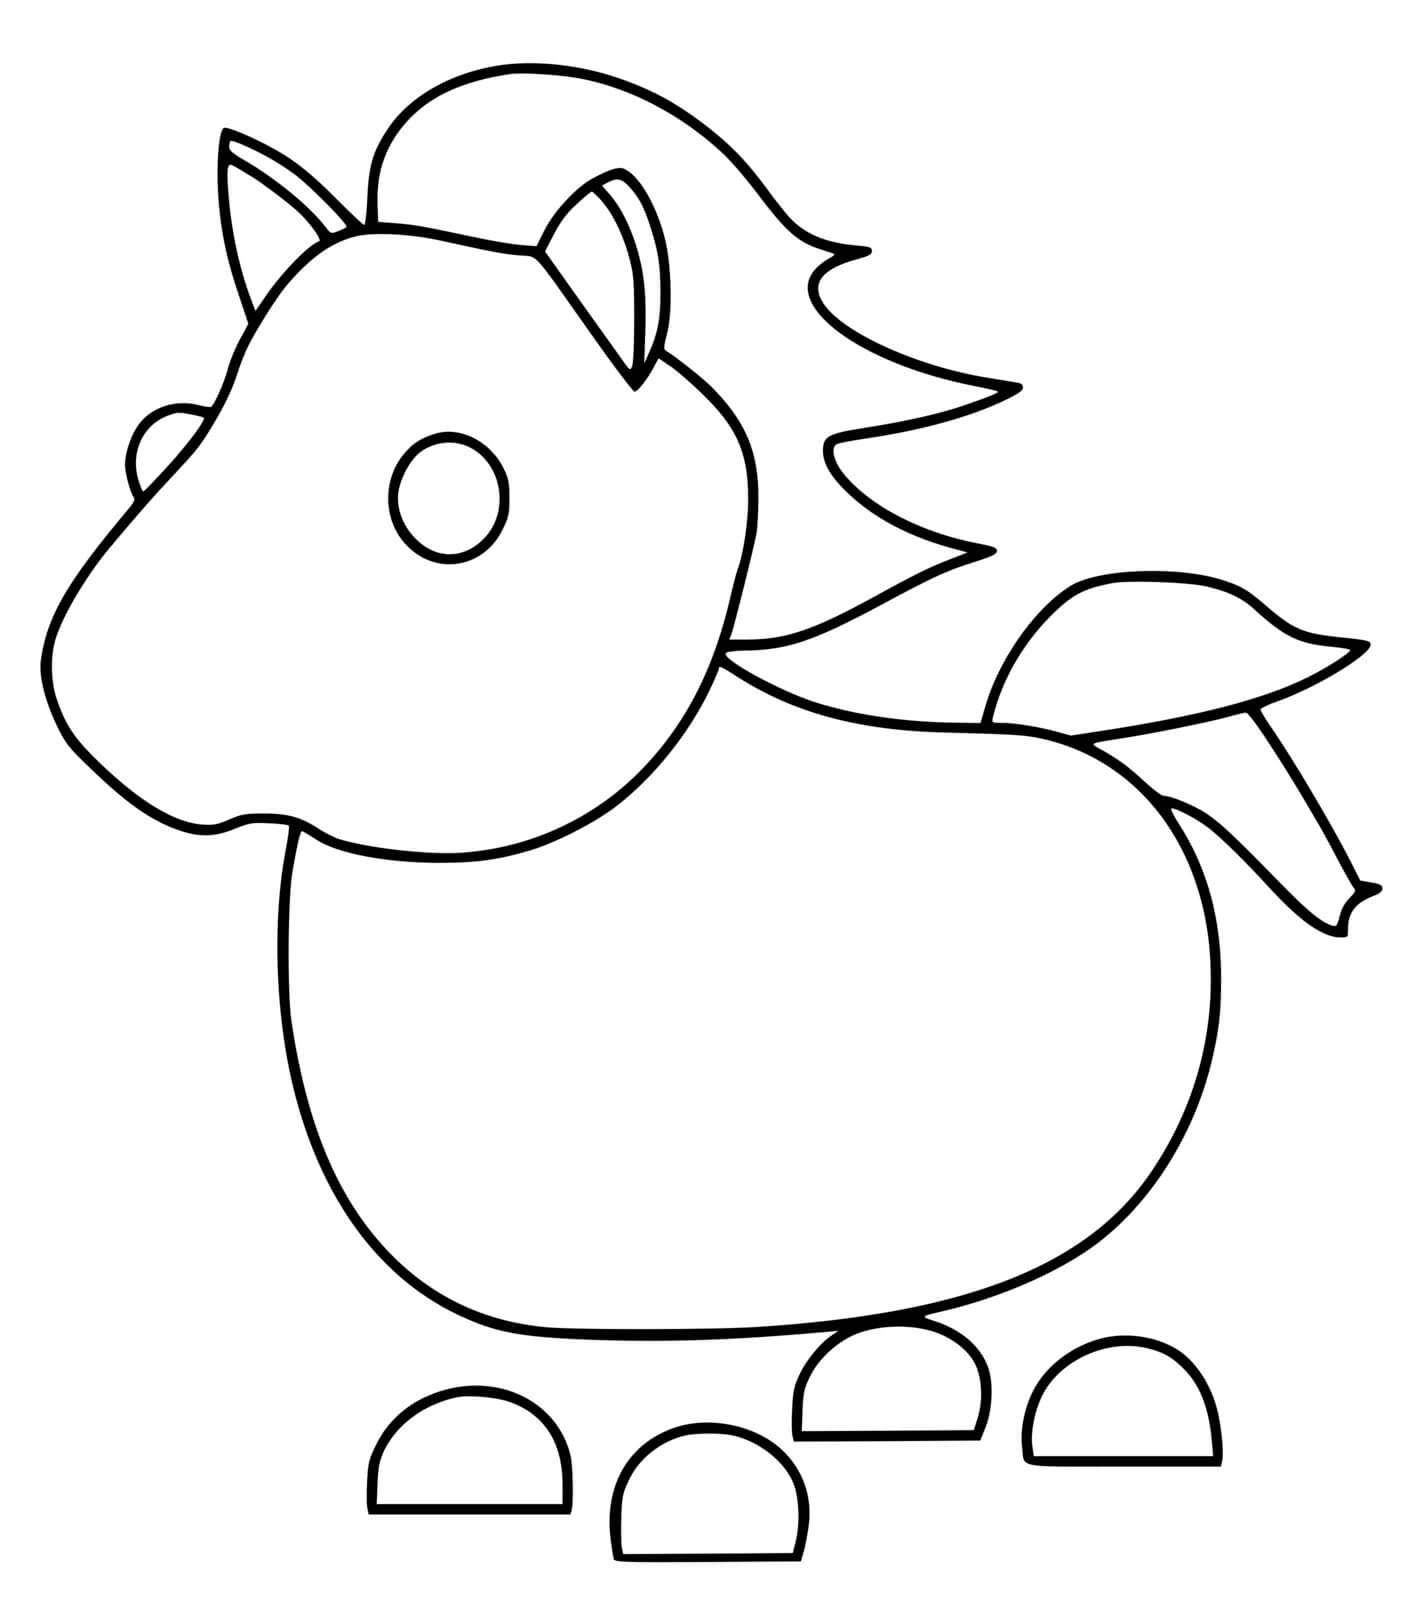 Roblox Adopt Me Horse Coloring Pages   Coloring Cool